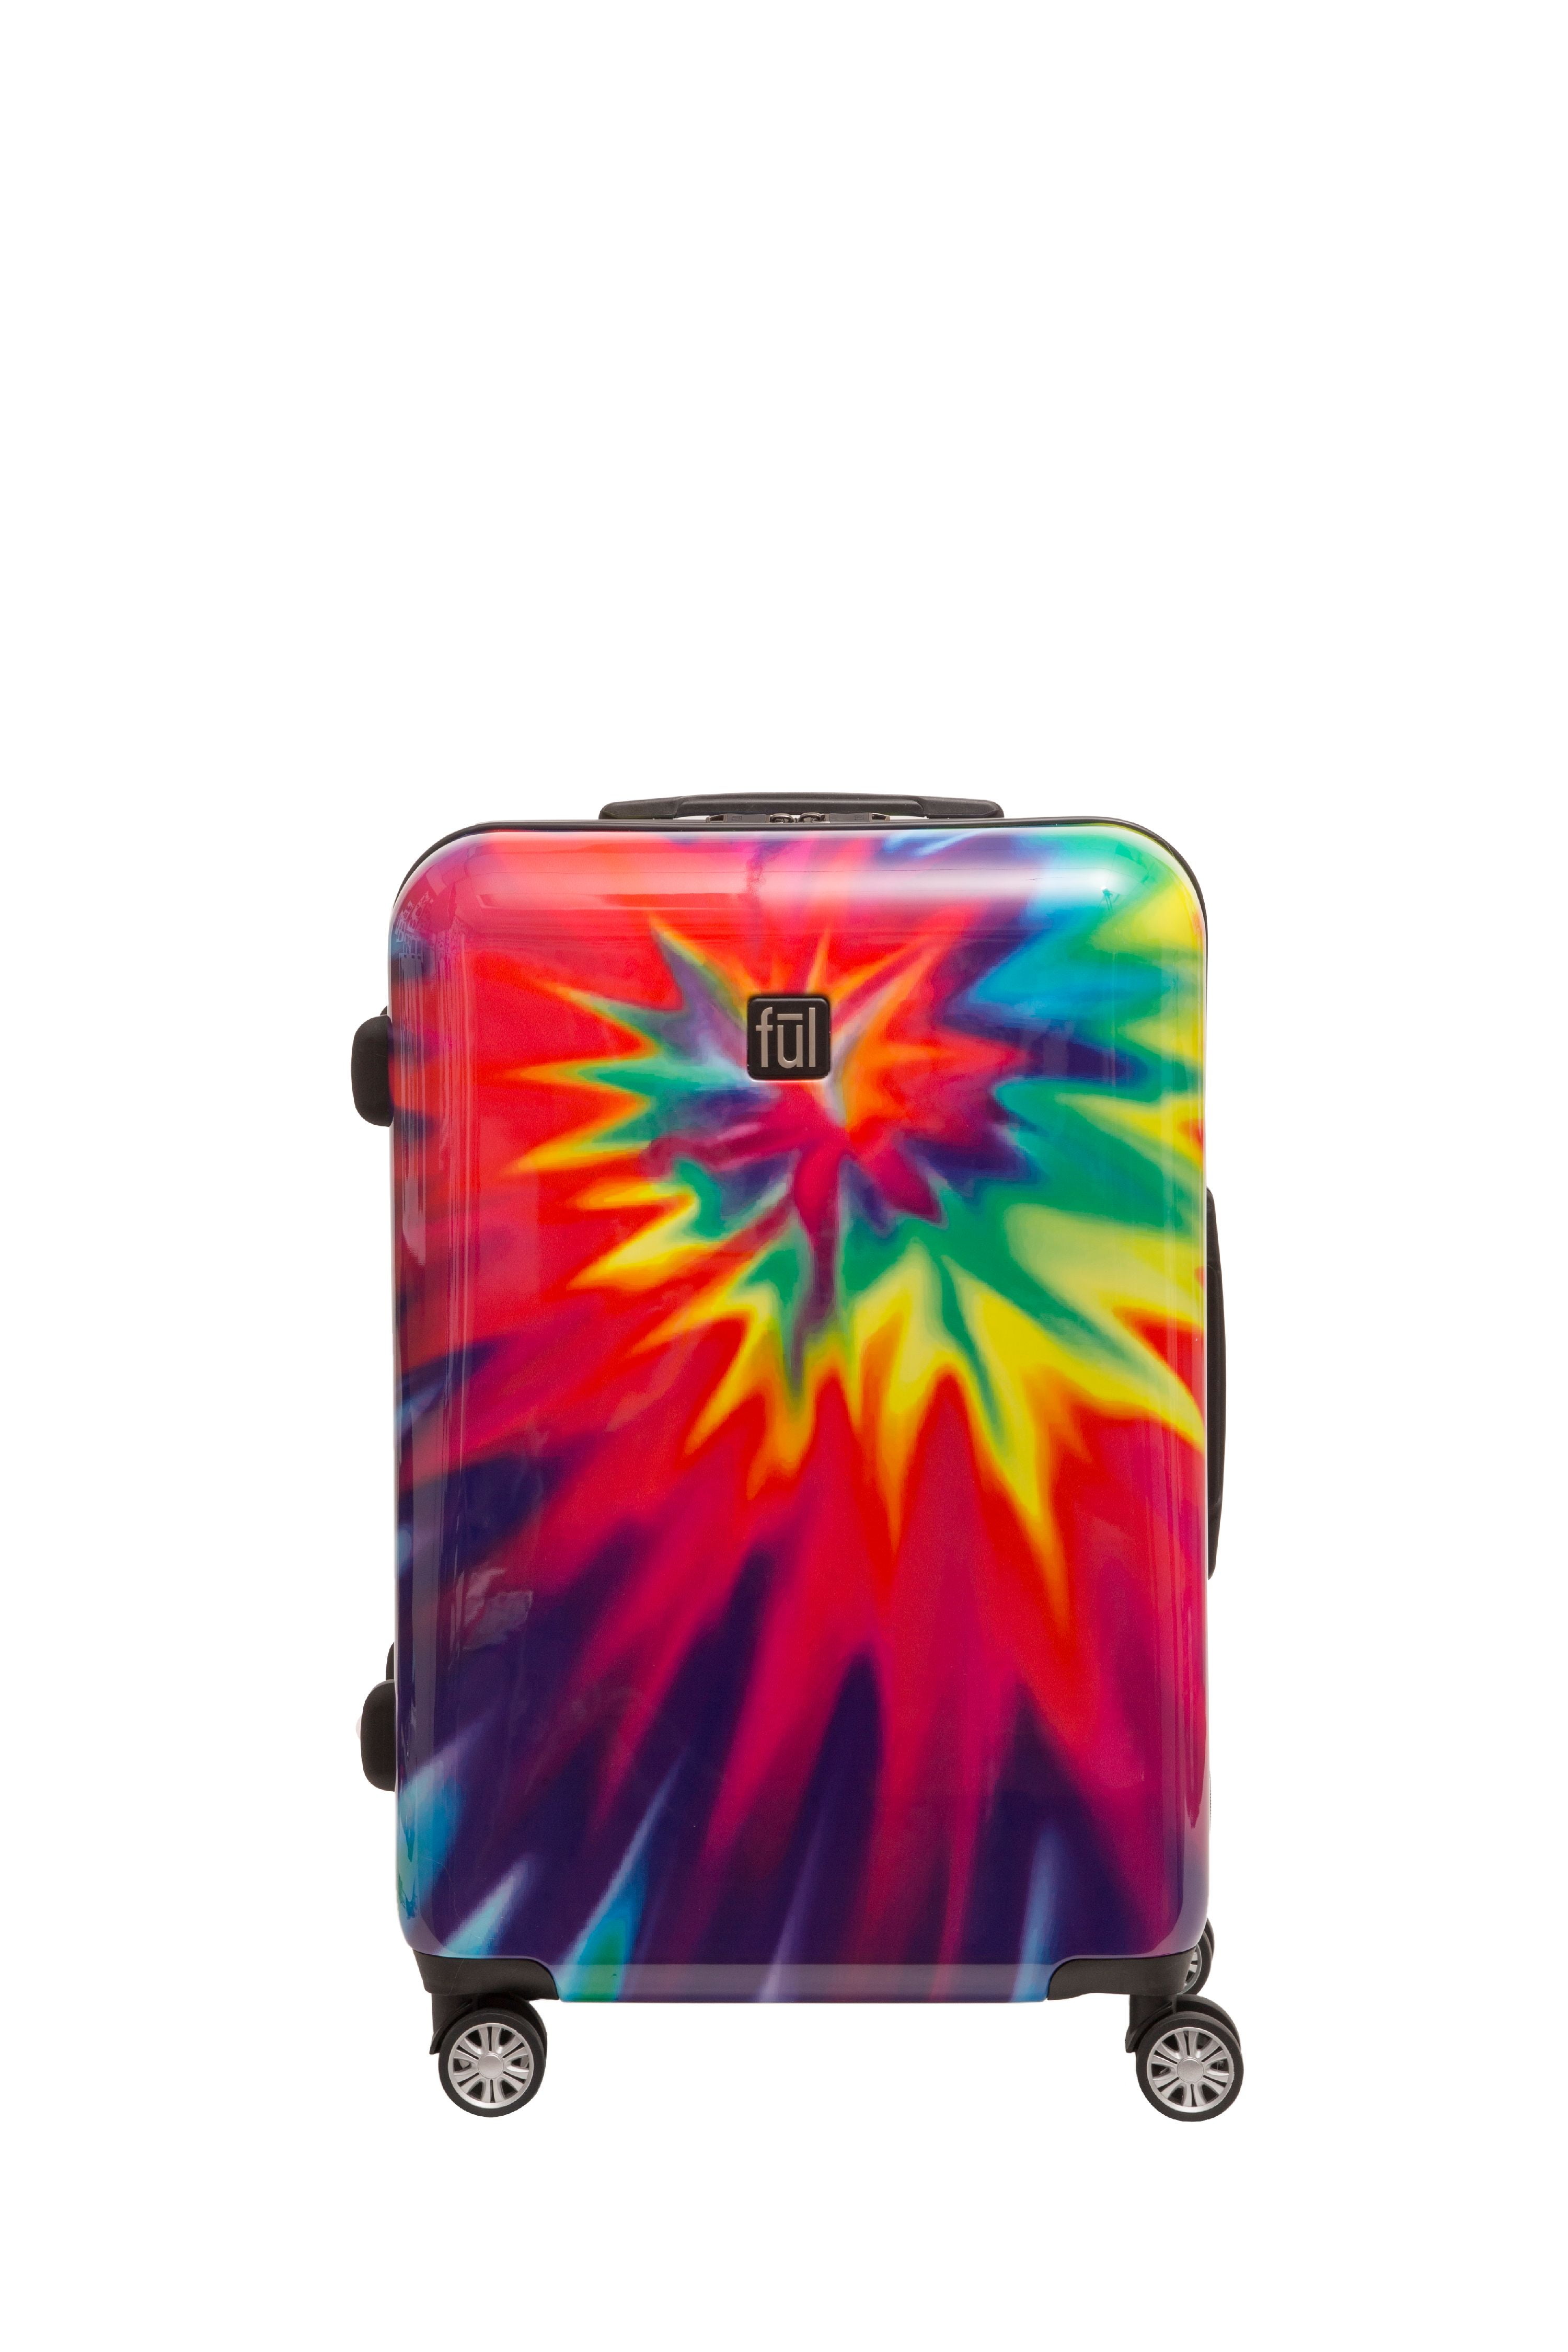 INTERESTPRINT Travel Luggage Cover Suitcase Protector Fit 18-28 Inch Luggage Spiral Tie Dye Design